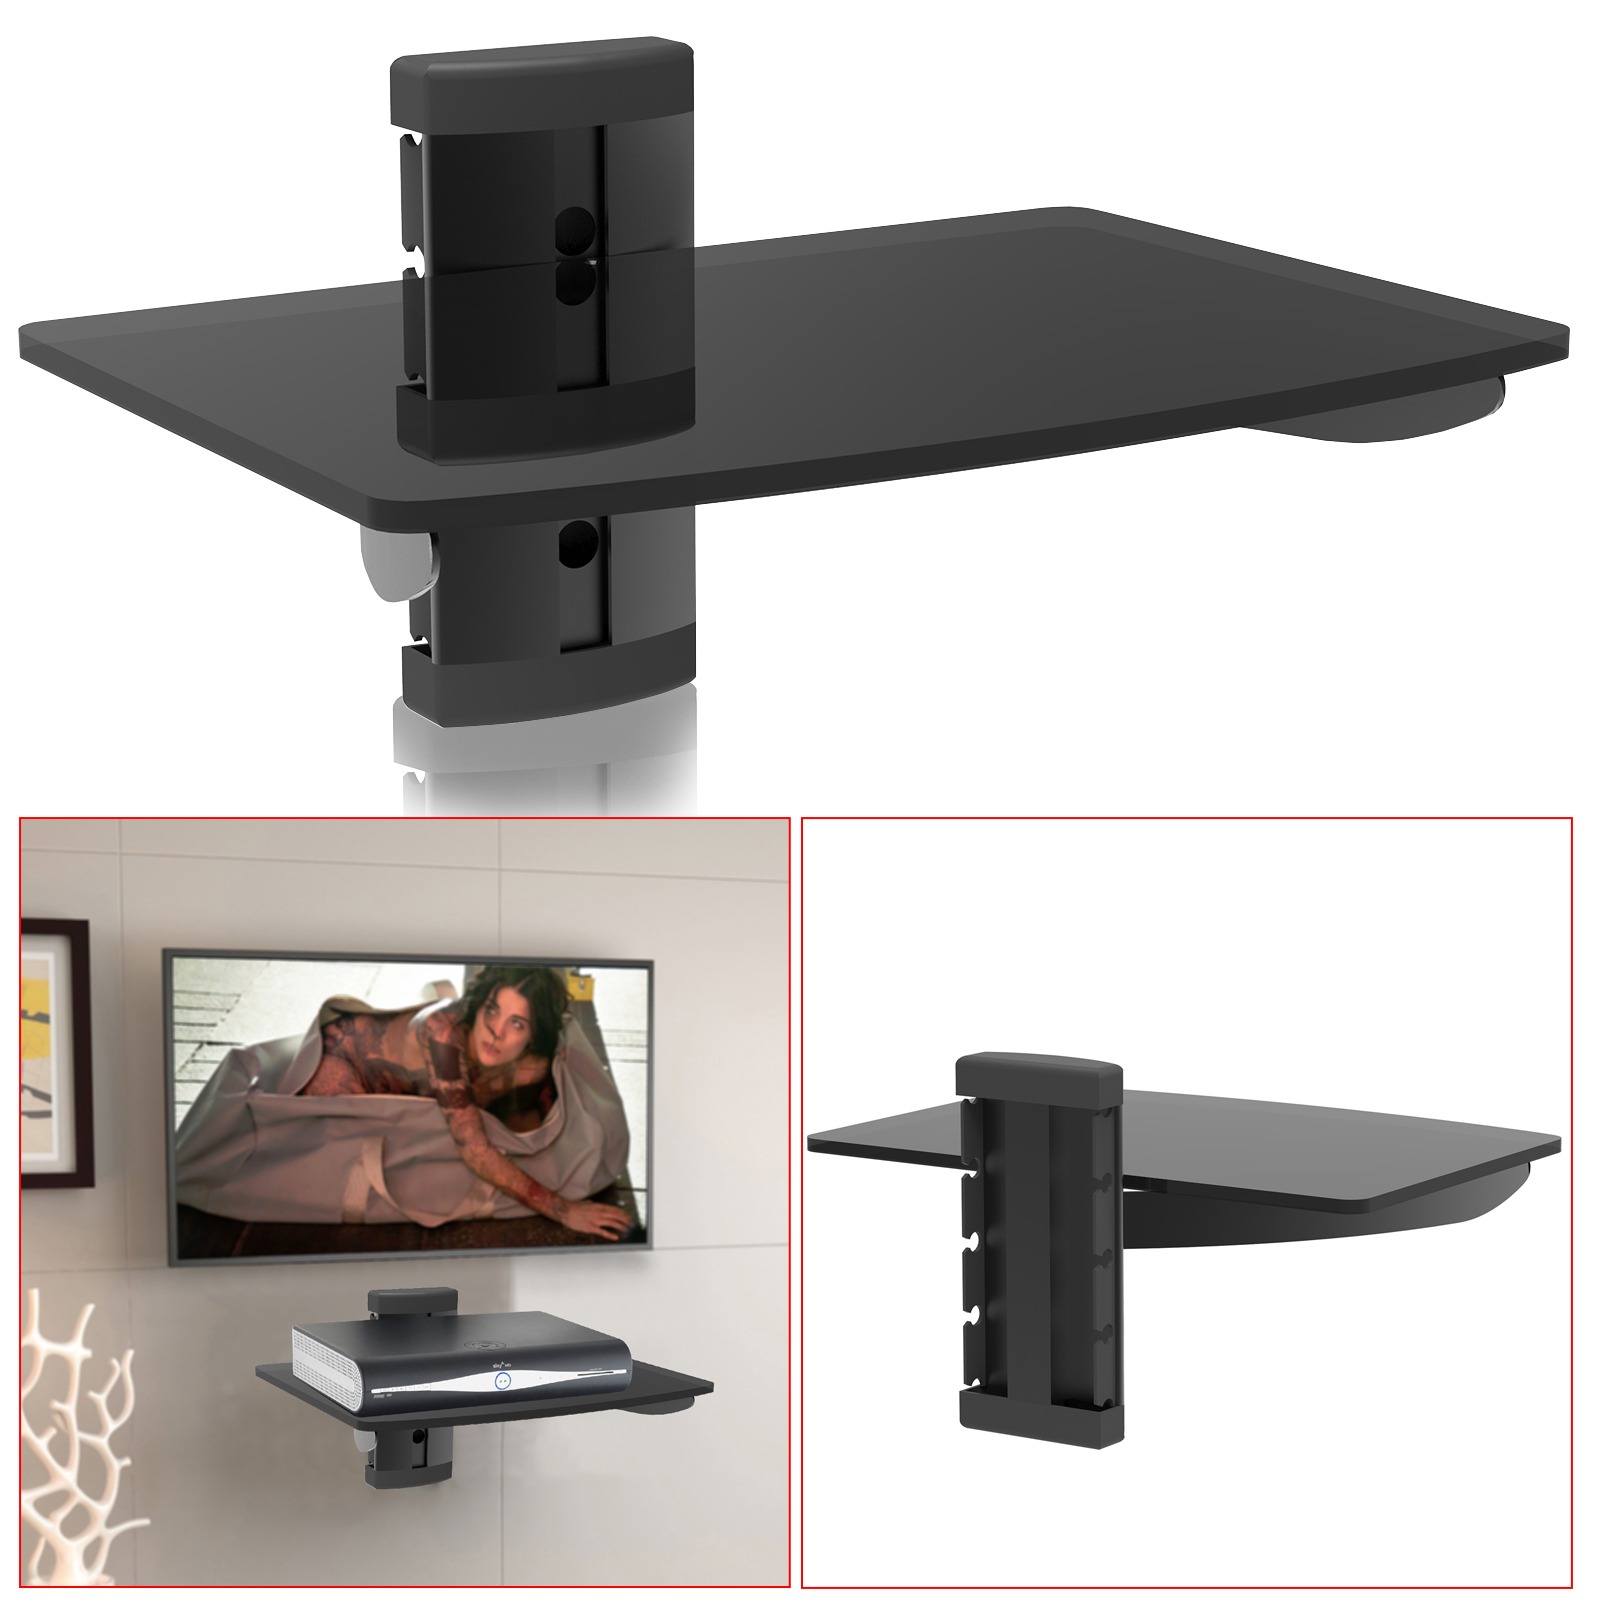 1 Tier Black Glass Floating Wall Mount Shelf Sky Box Game Console DVD Player